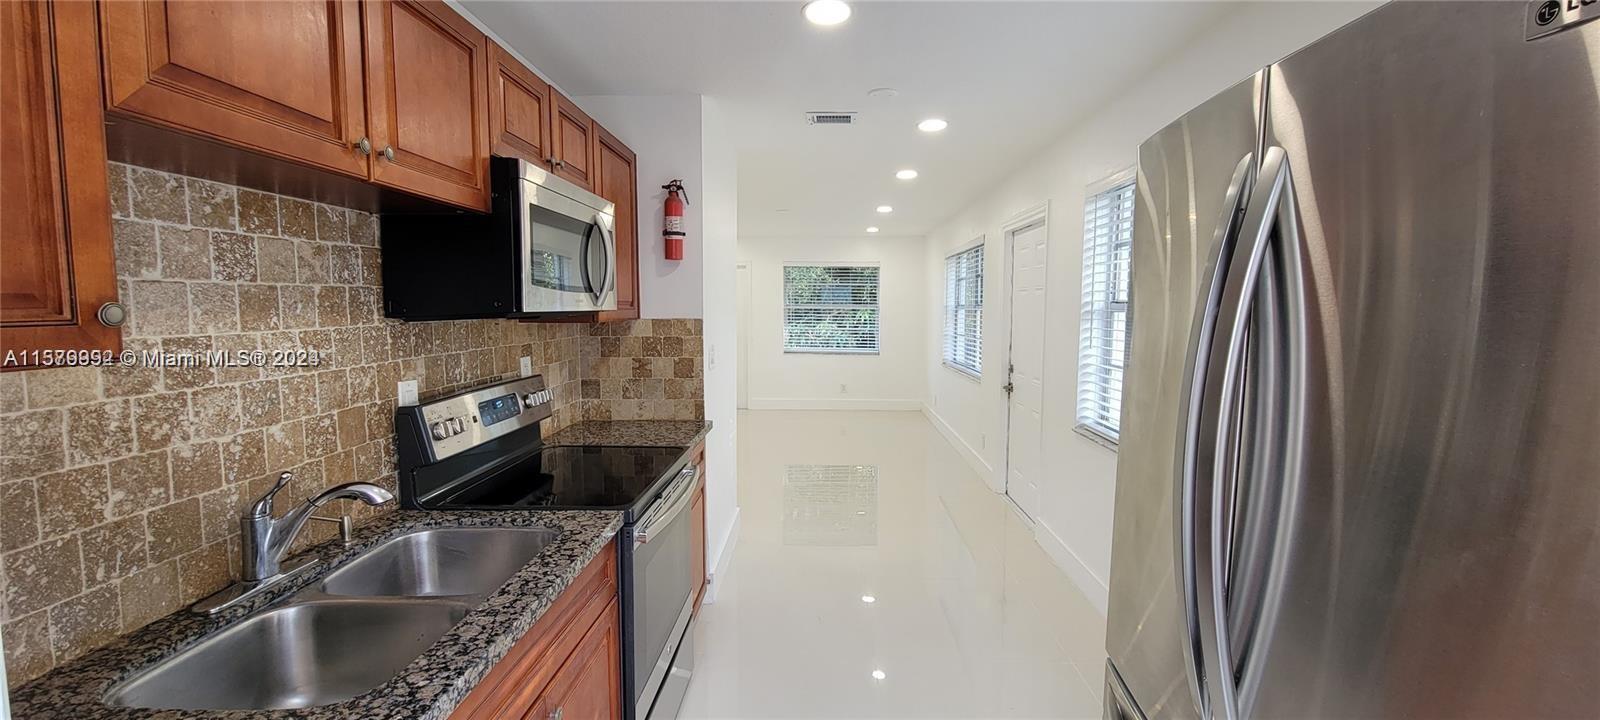 Photo of 831 NW 14th Wy #2 in Fort Lauderdale, FL